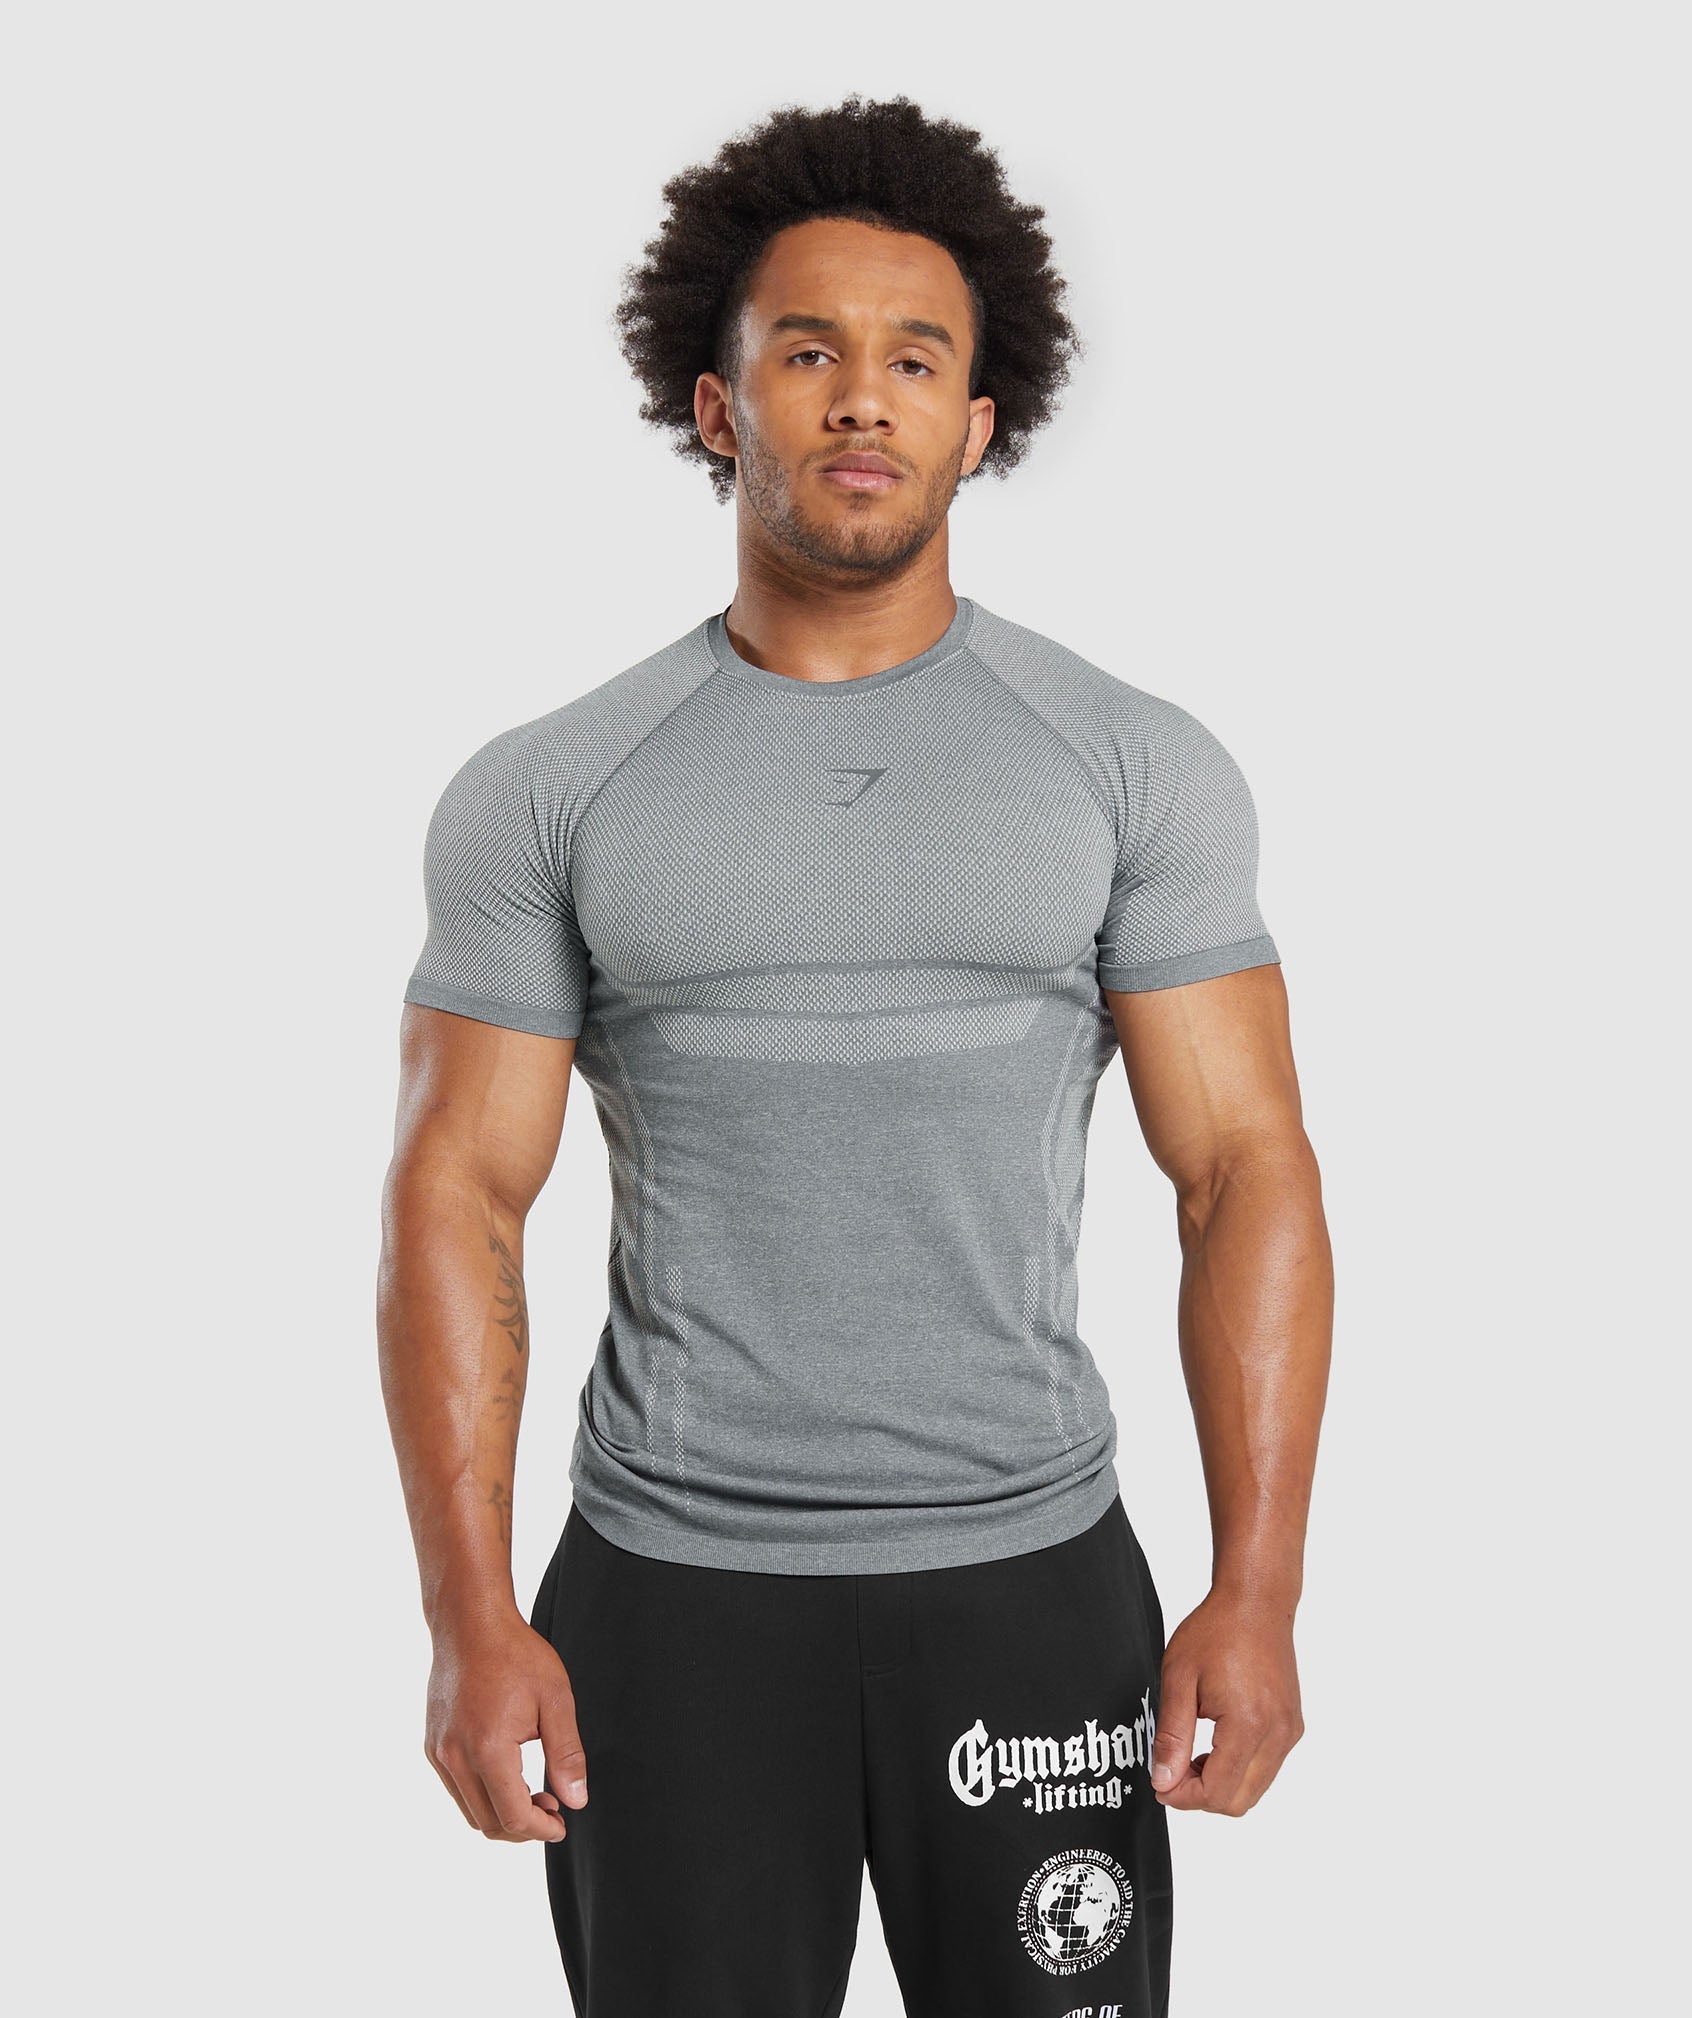 Elite Seamless T-Shirt in Pitch Grey/Light Grey - view 1